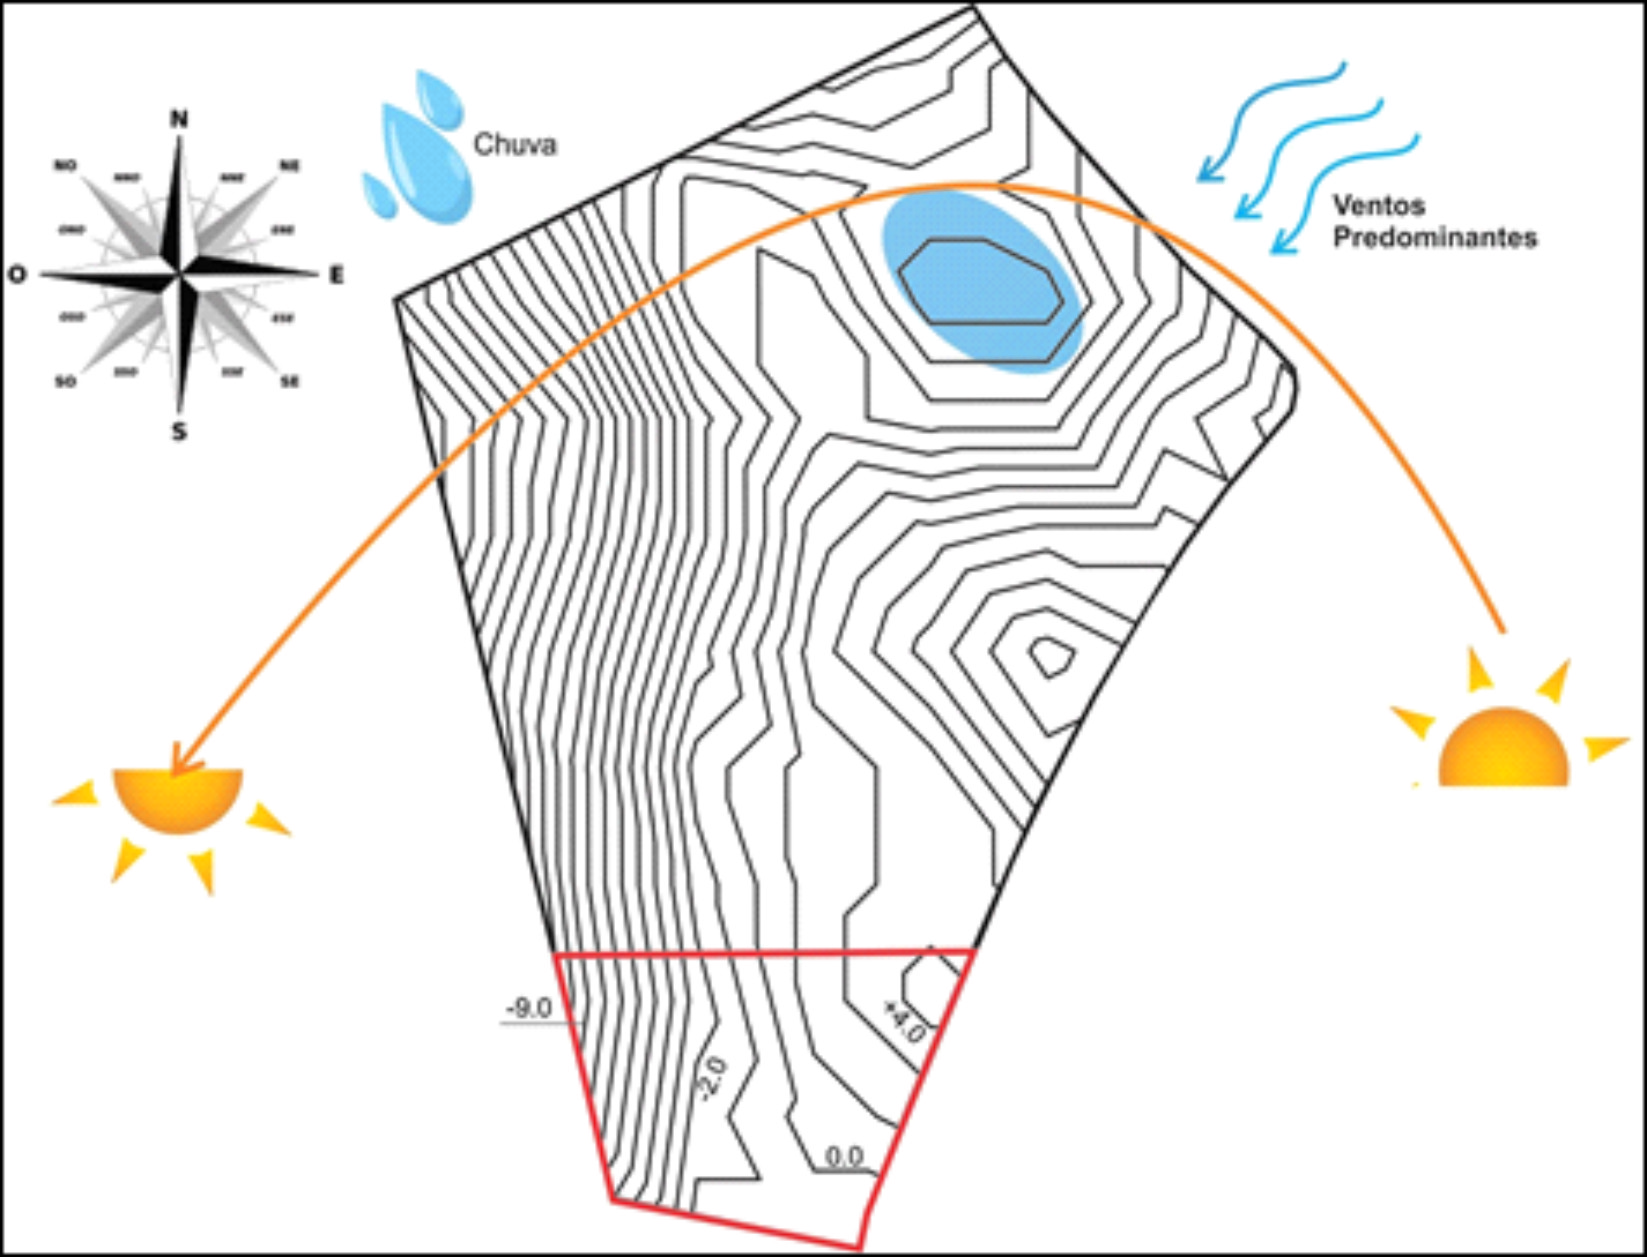 Figure 1- Insolation, prevailing winds and intervention area topography (FABIANA MENEGON, 2019).